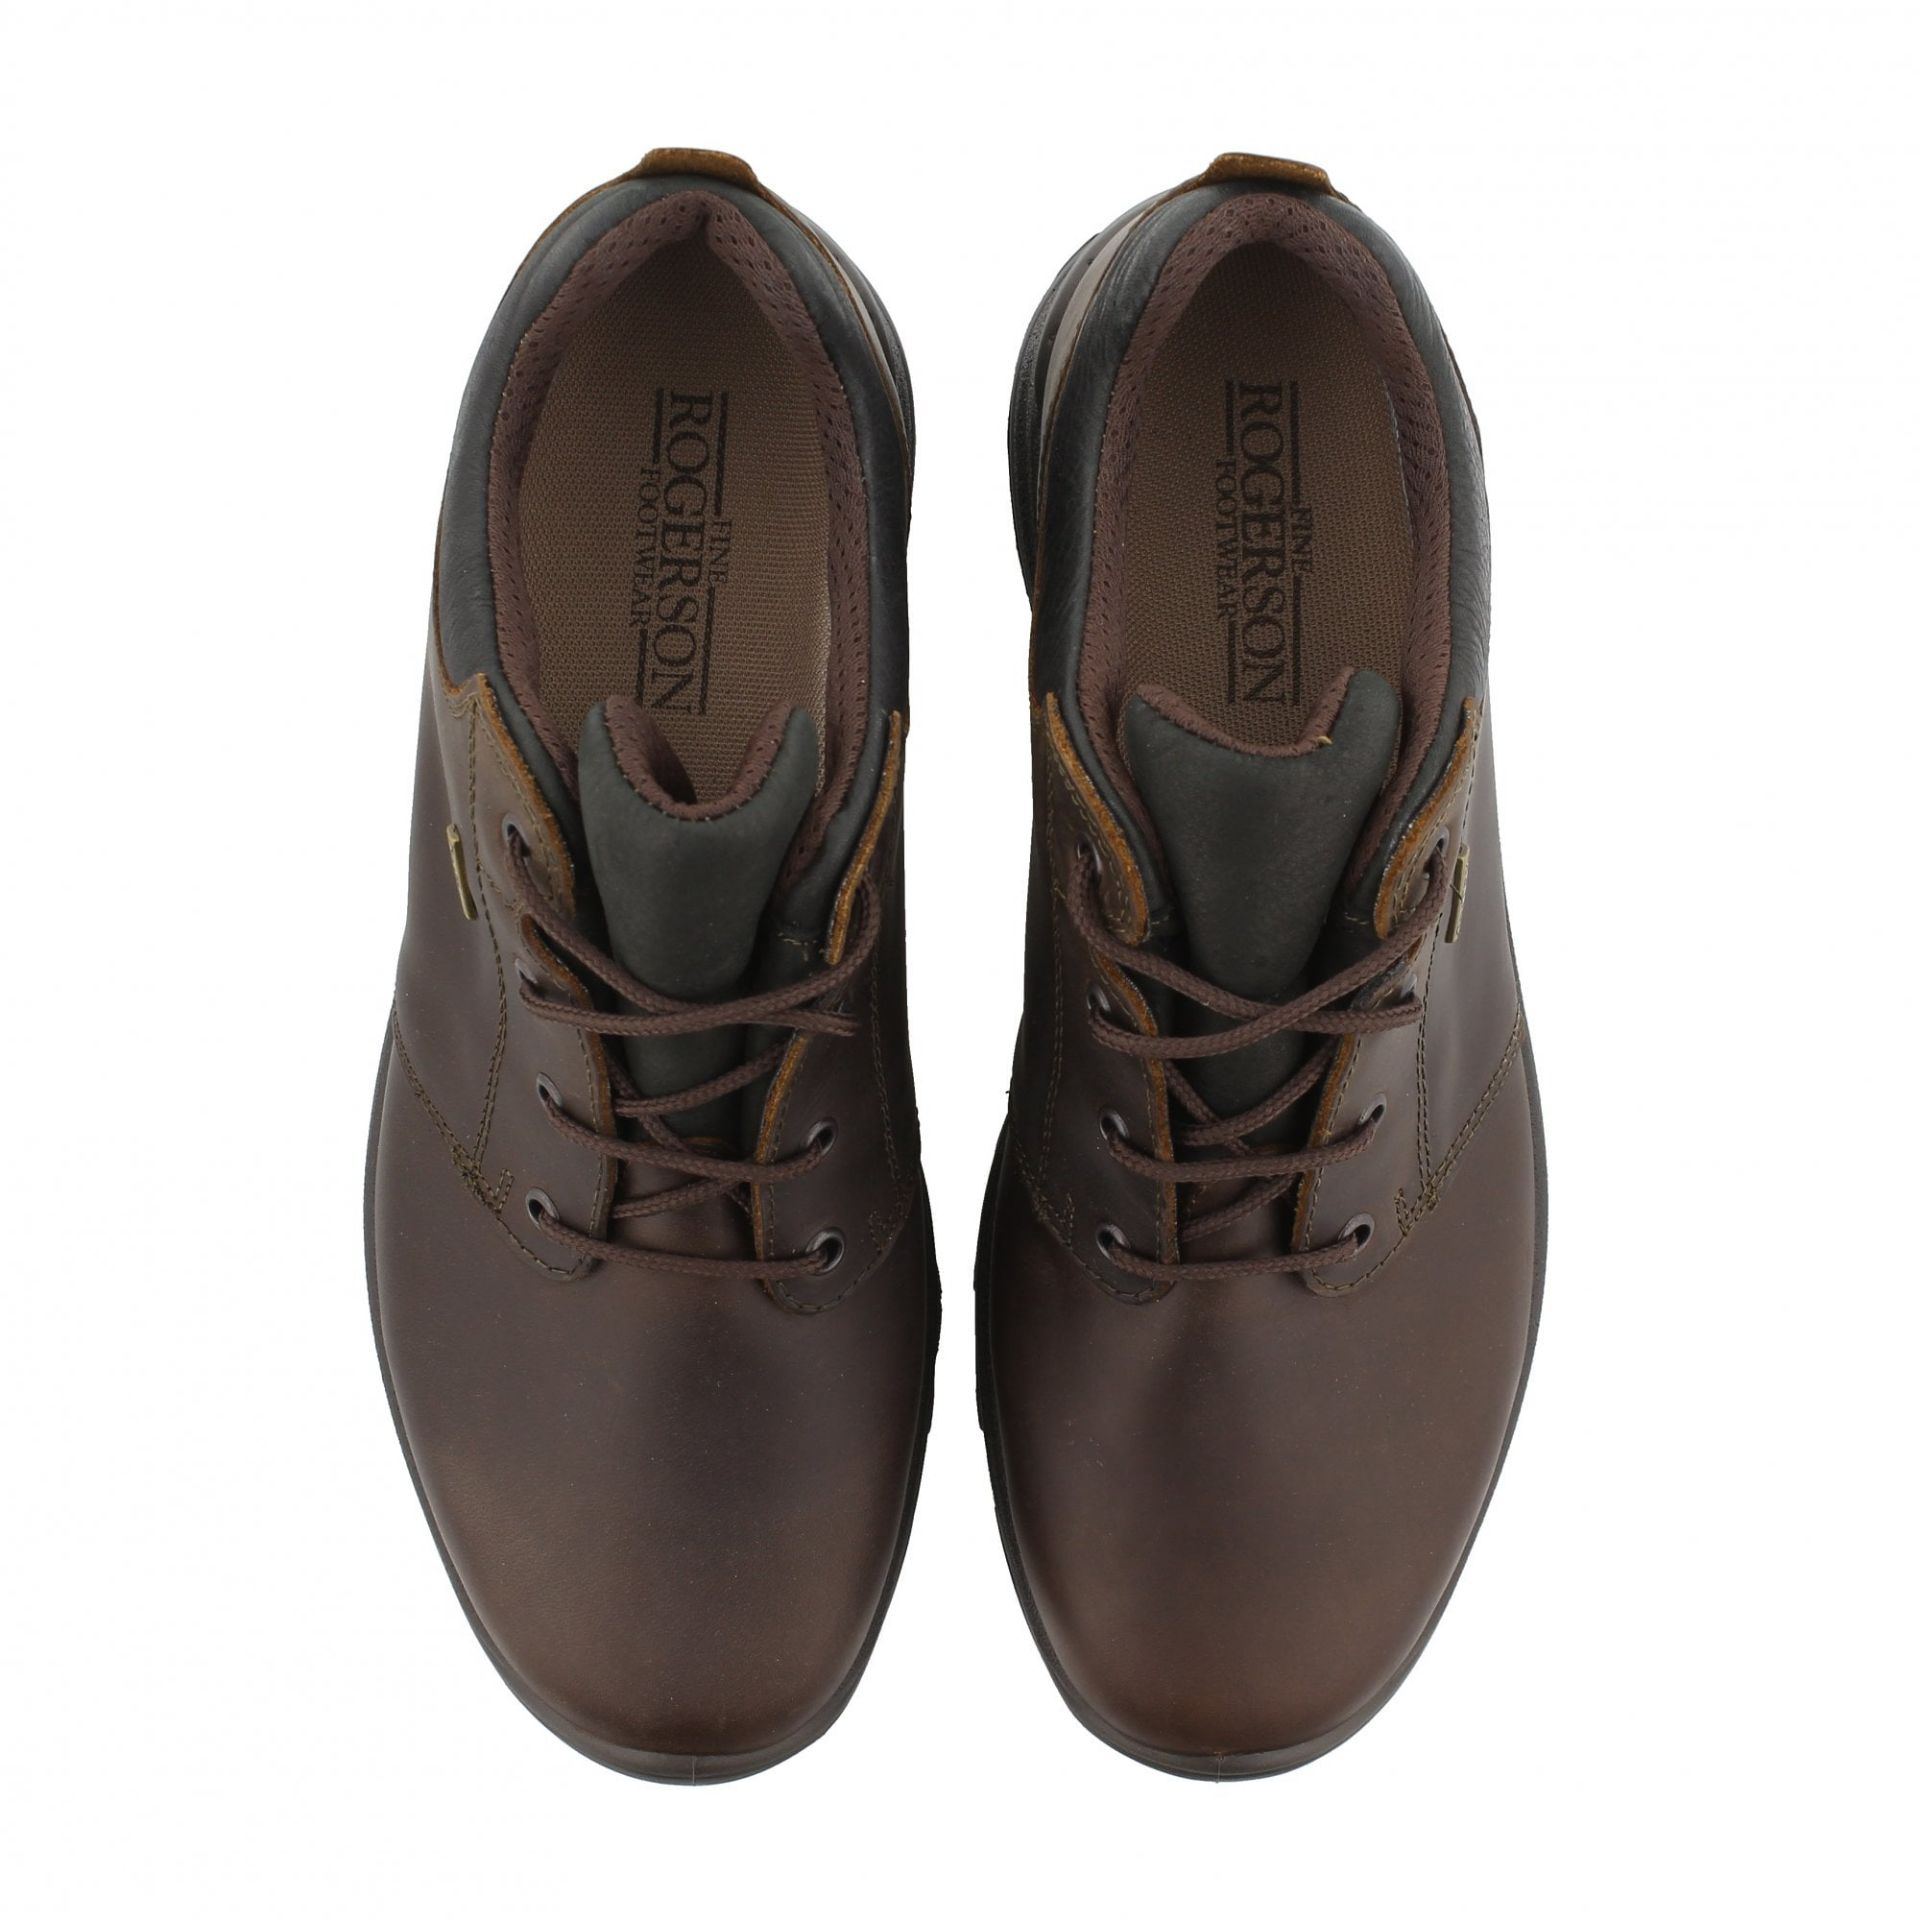 1 x Pair of Men's Grisport Brown Leather GriTex Shoes - Rogerson Footwear - Brand New and Boxed - - Image 9 of 9